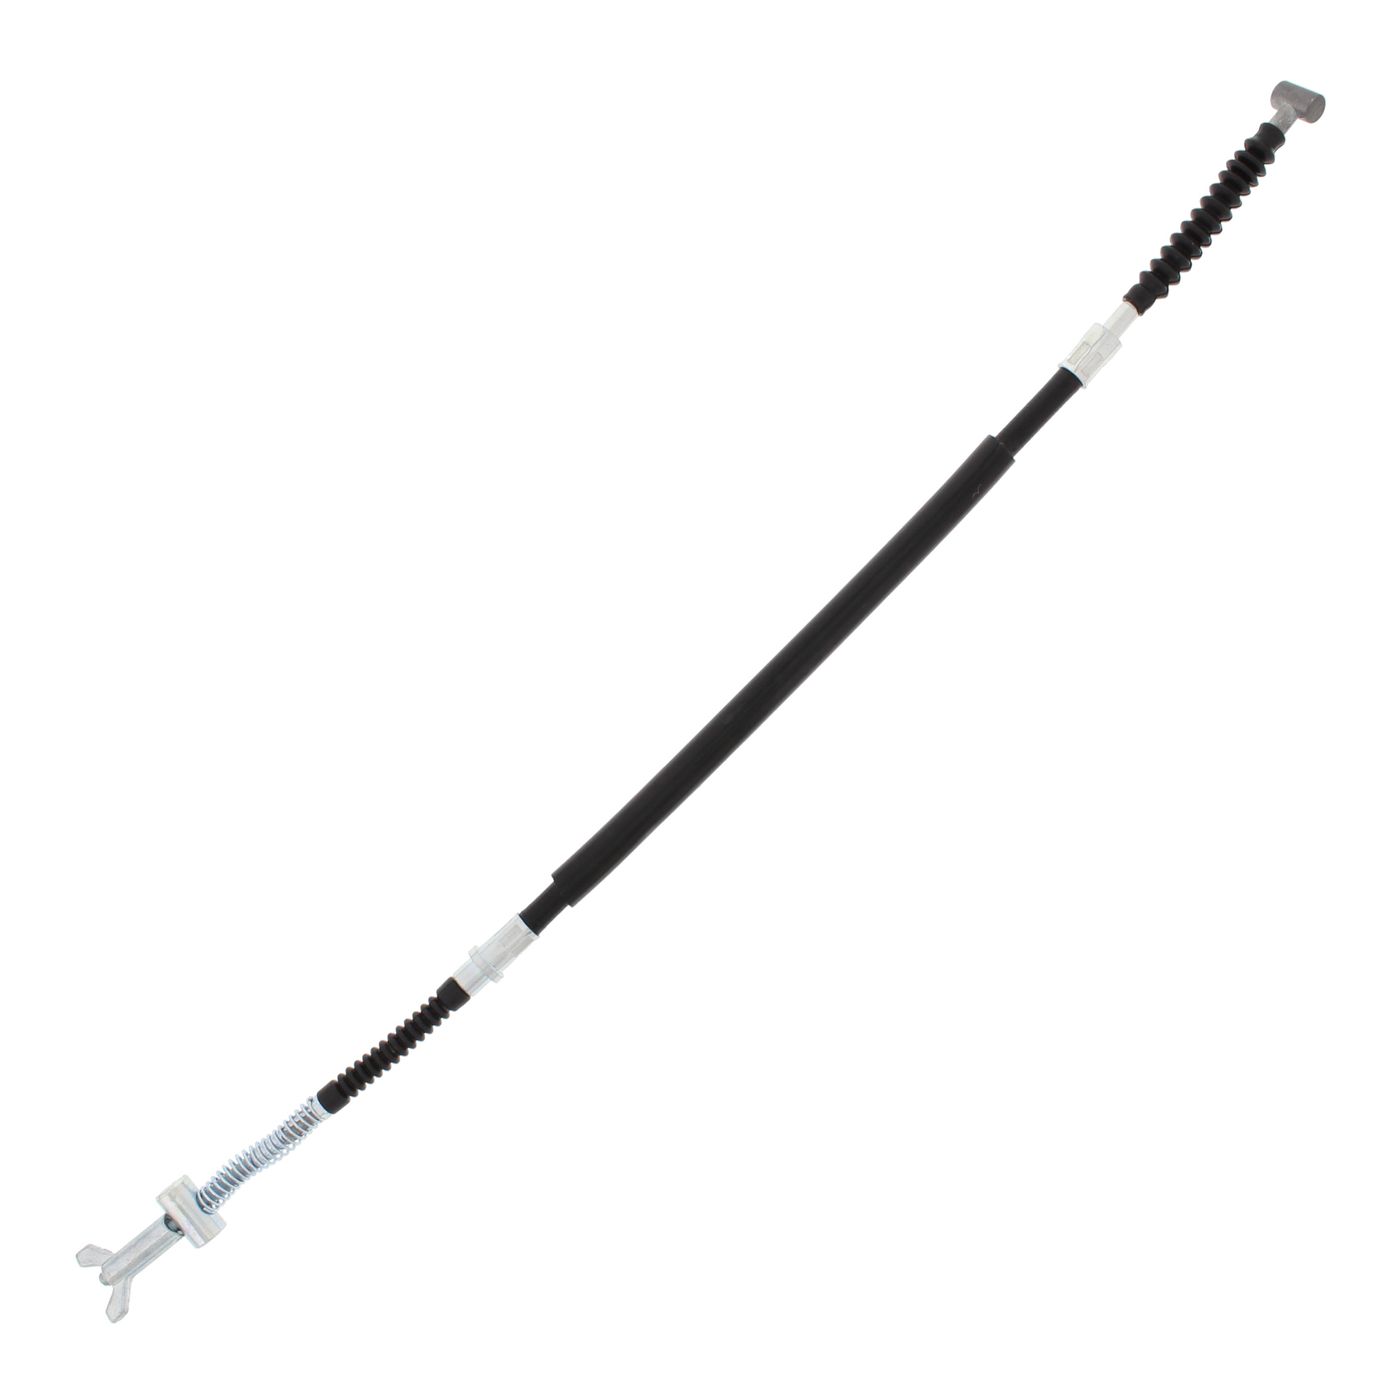 Wrp Brake Cables - WRP454003 image